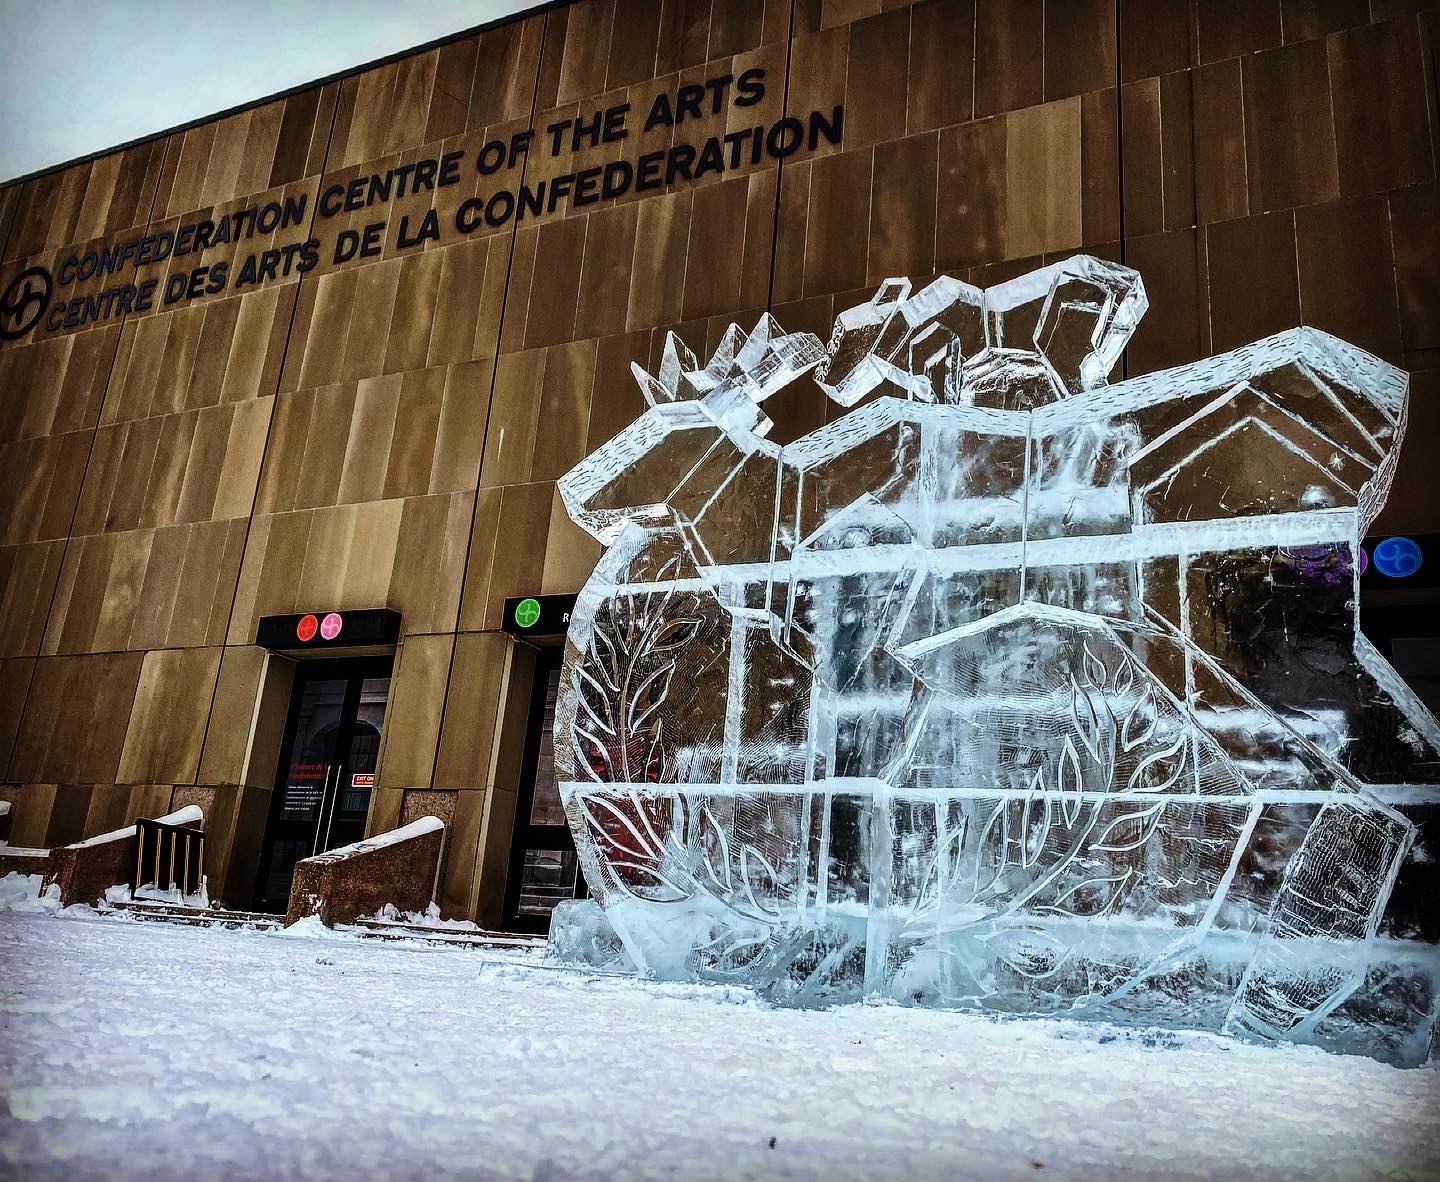 A caribou carved from ice, on display outside the confederation centre of the arts